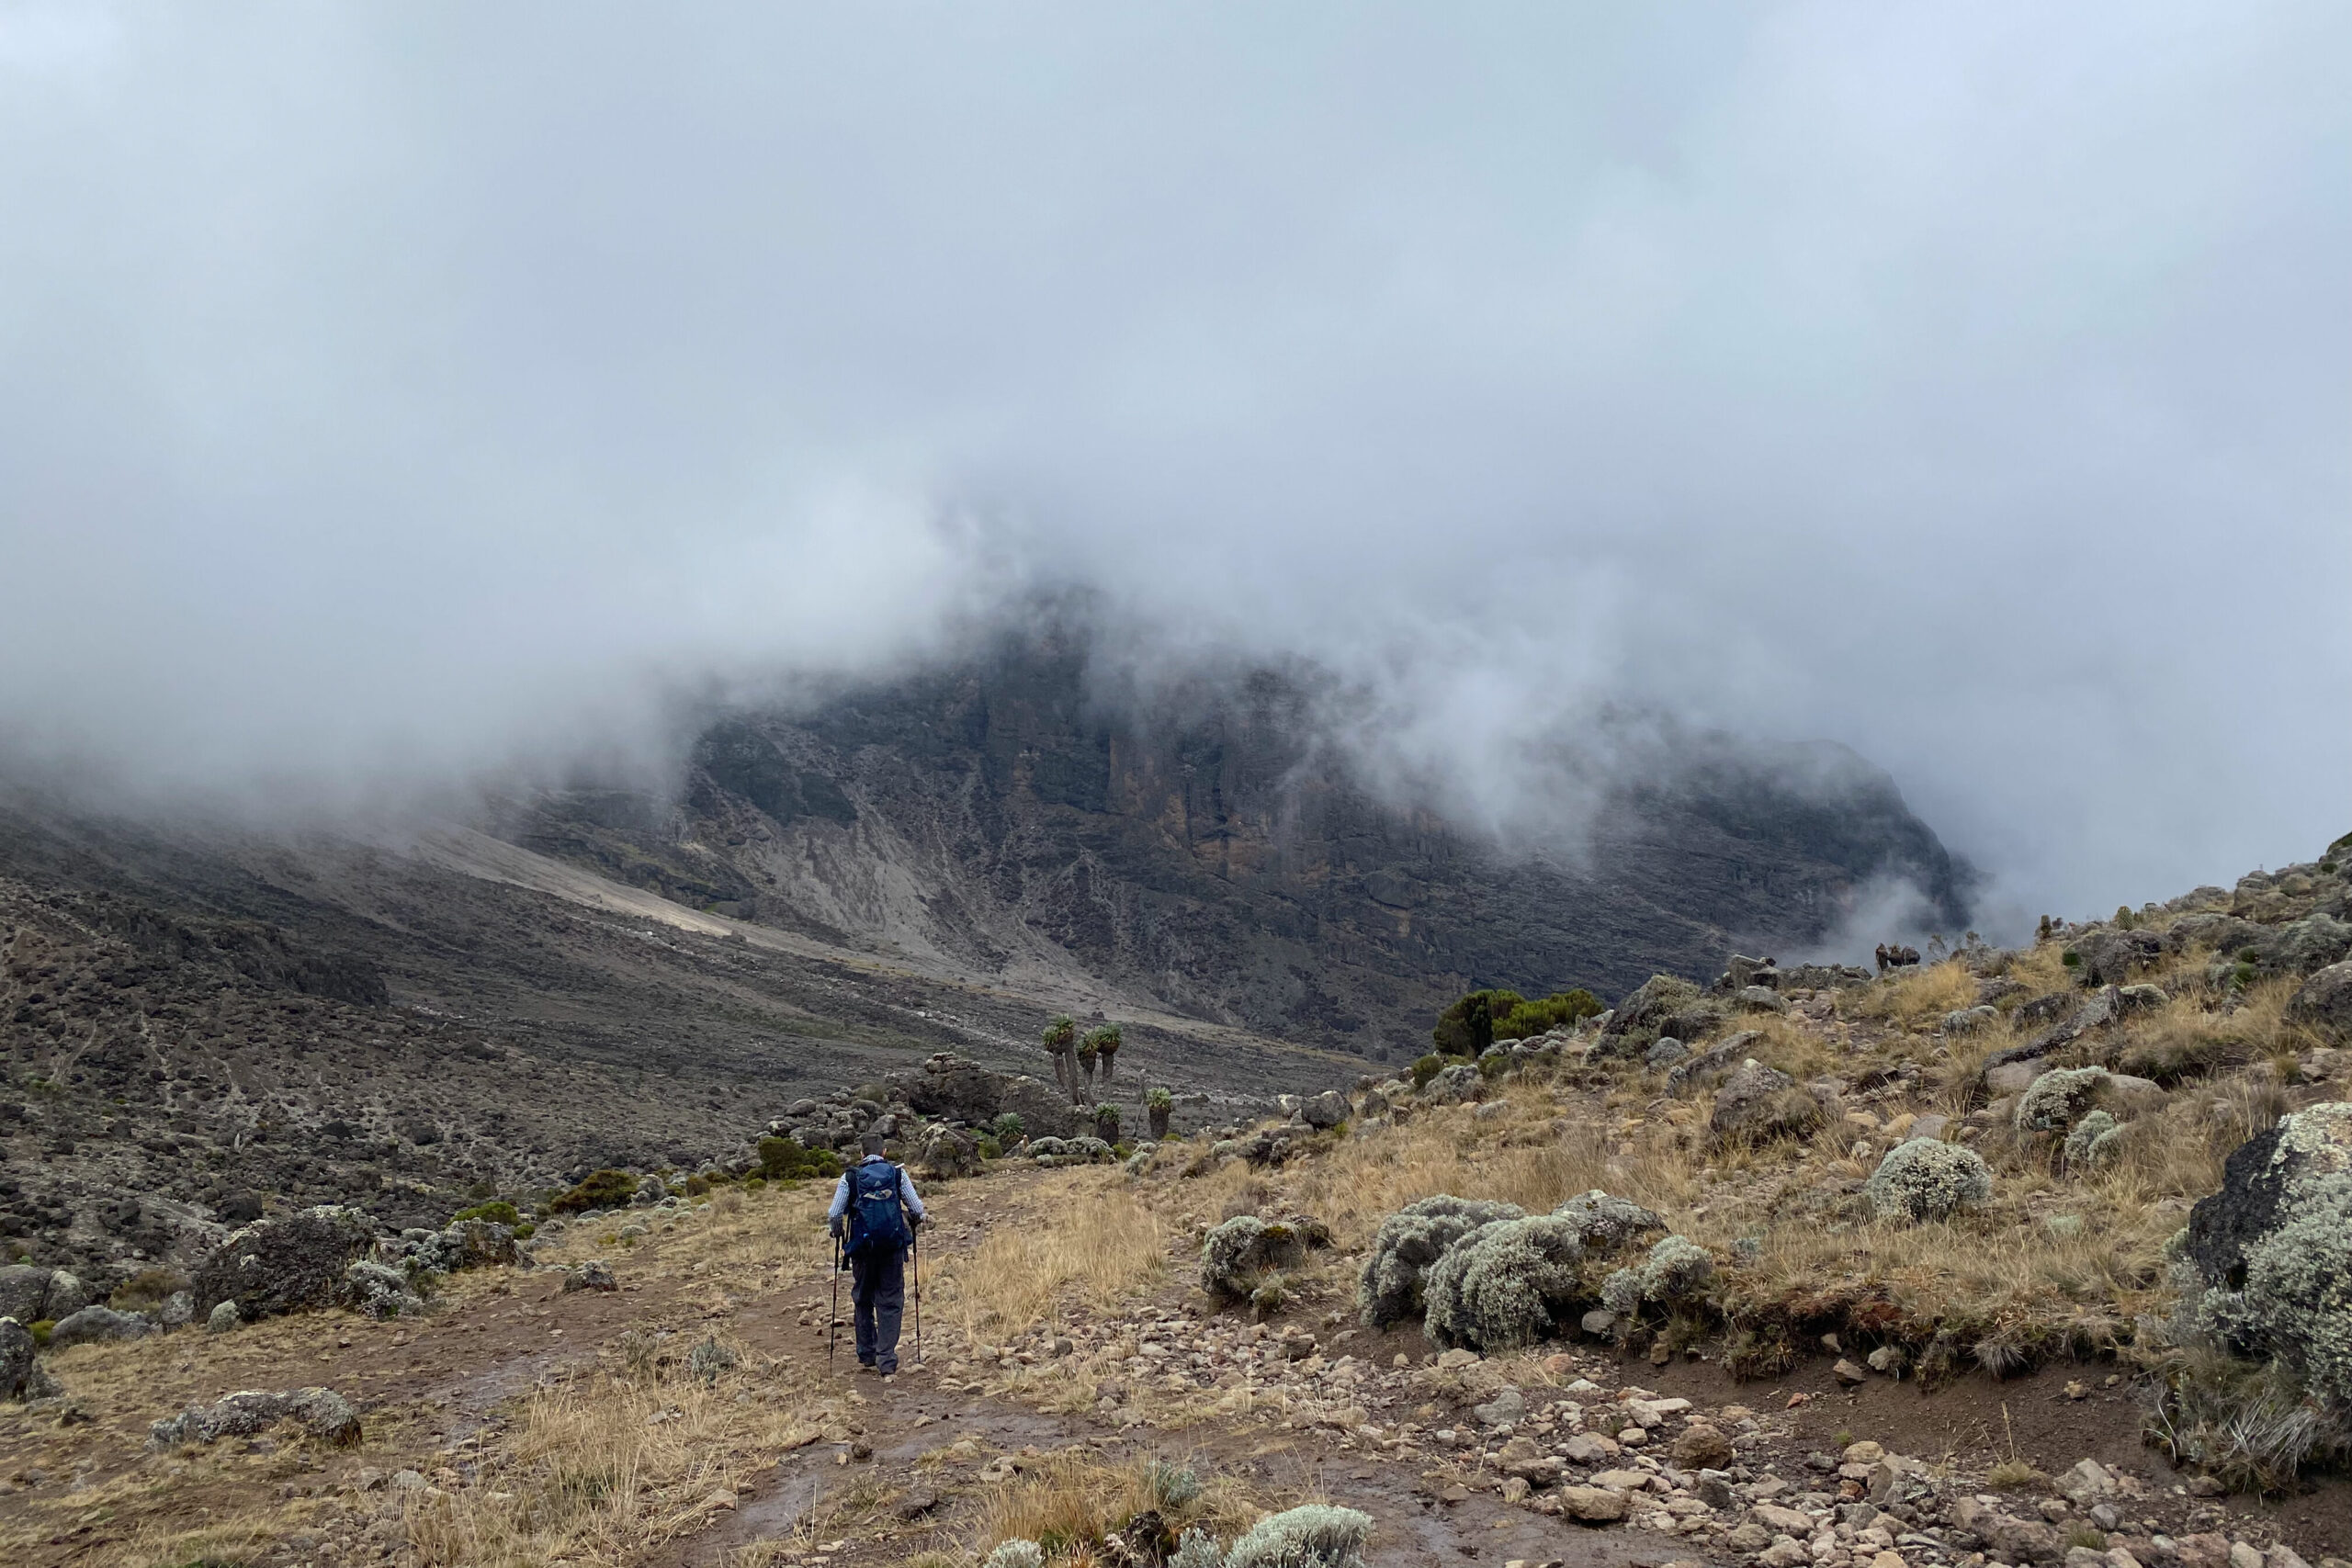 Lone person hiking a foggy cloudy trail up the Lemosho Route on Mount Kilimanjaro